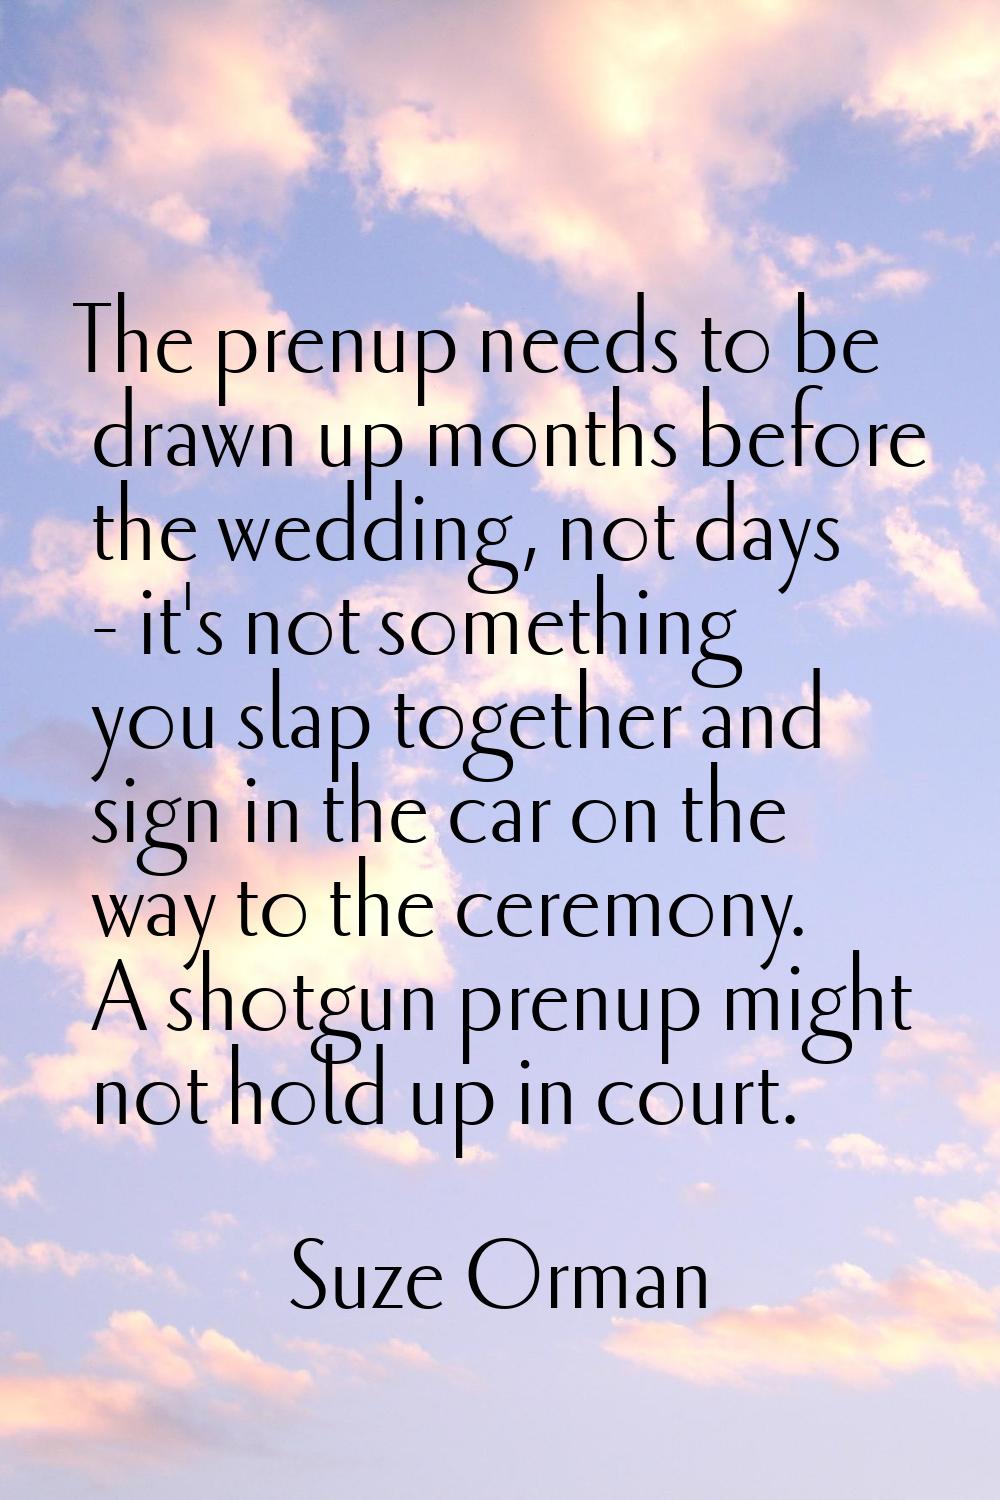 The prenup needs to be drawn up months before the wedding, not days - it's not something you slap t